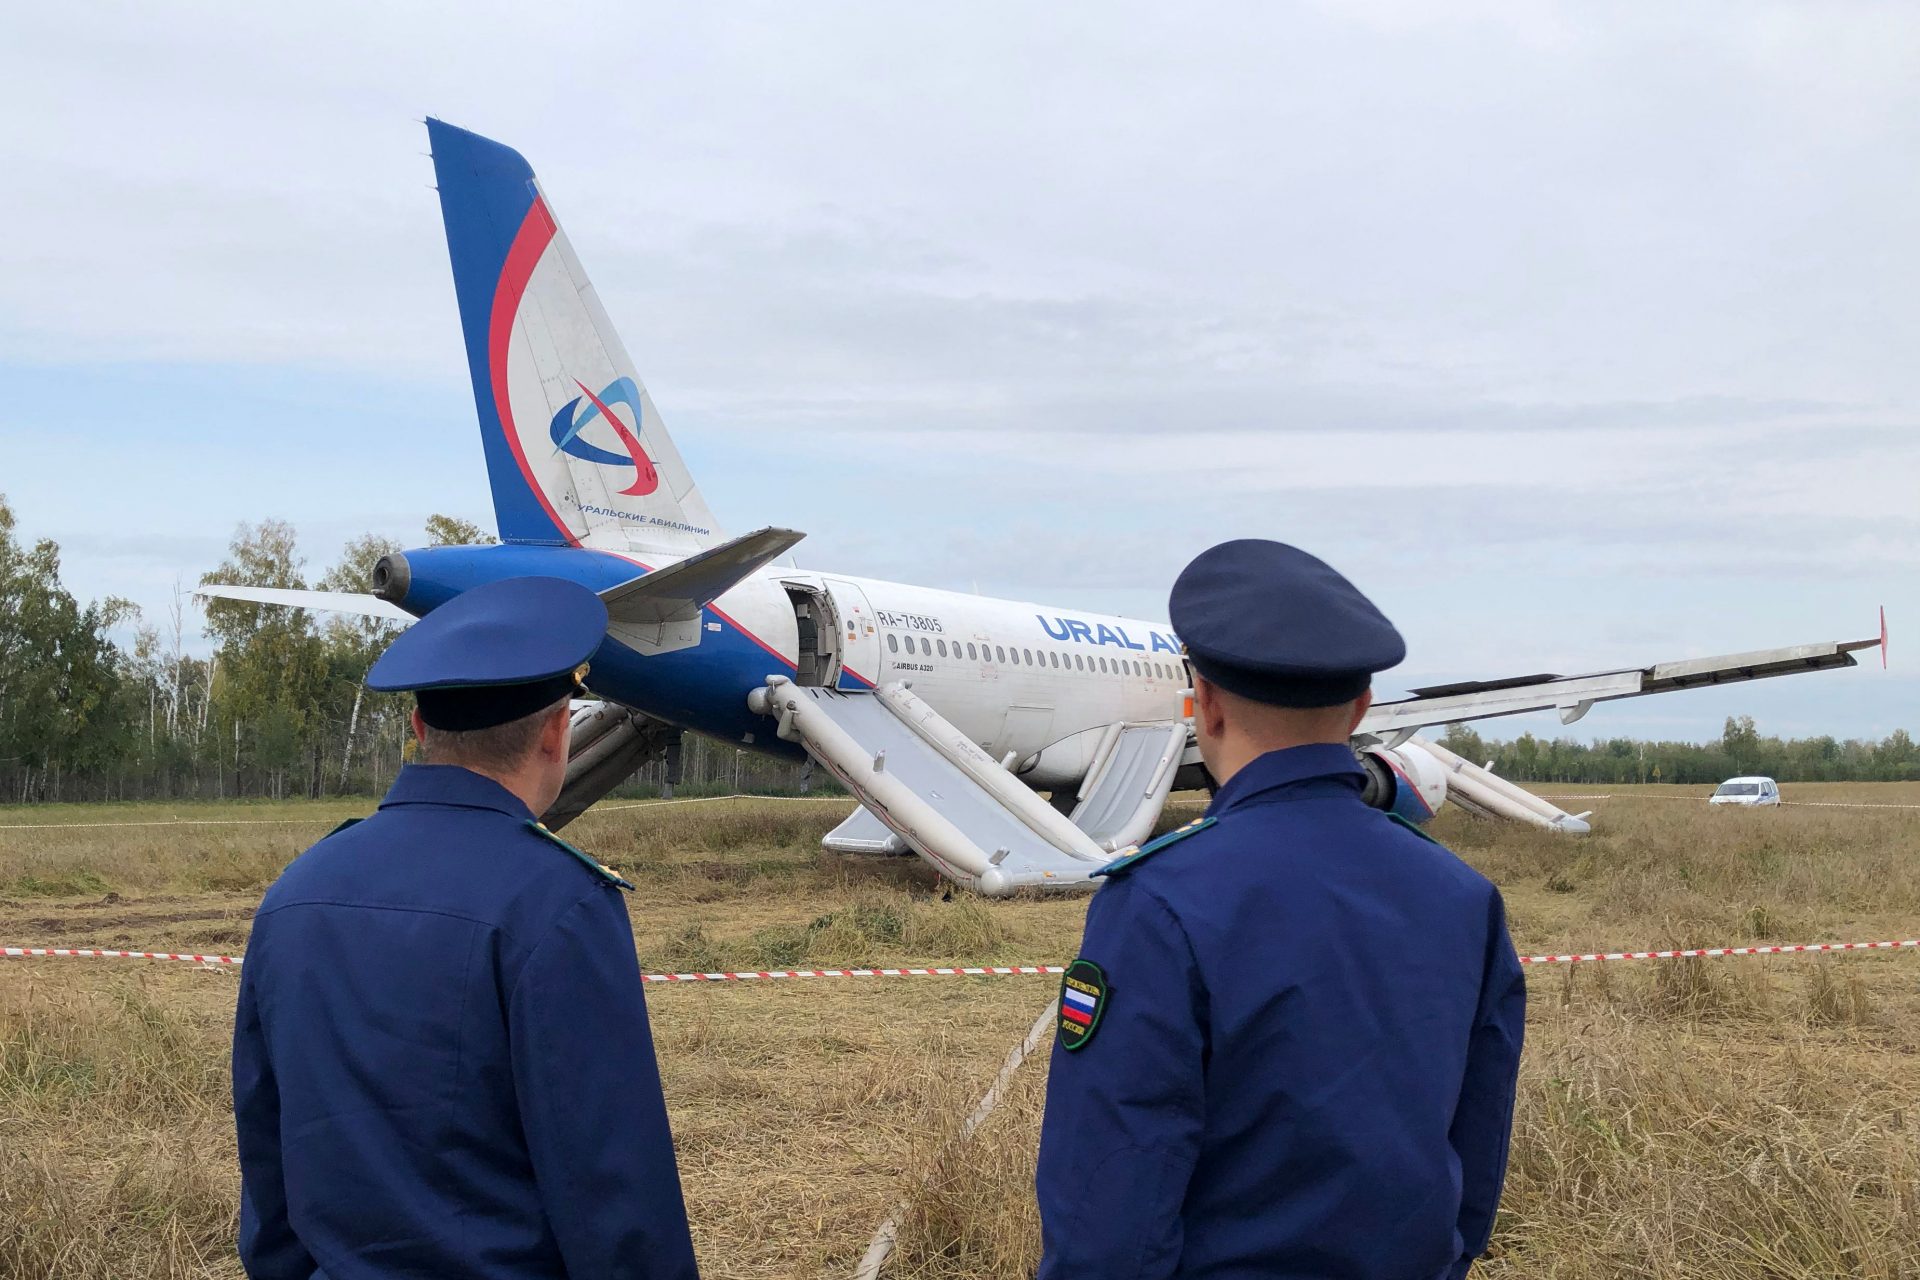 Did you miss the story about a Russian passenger jet crash landing?